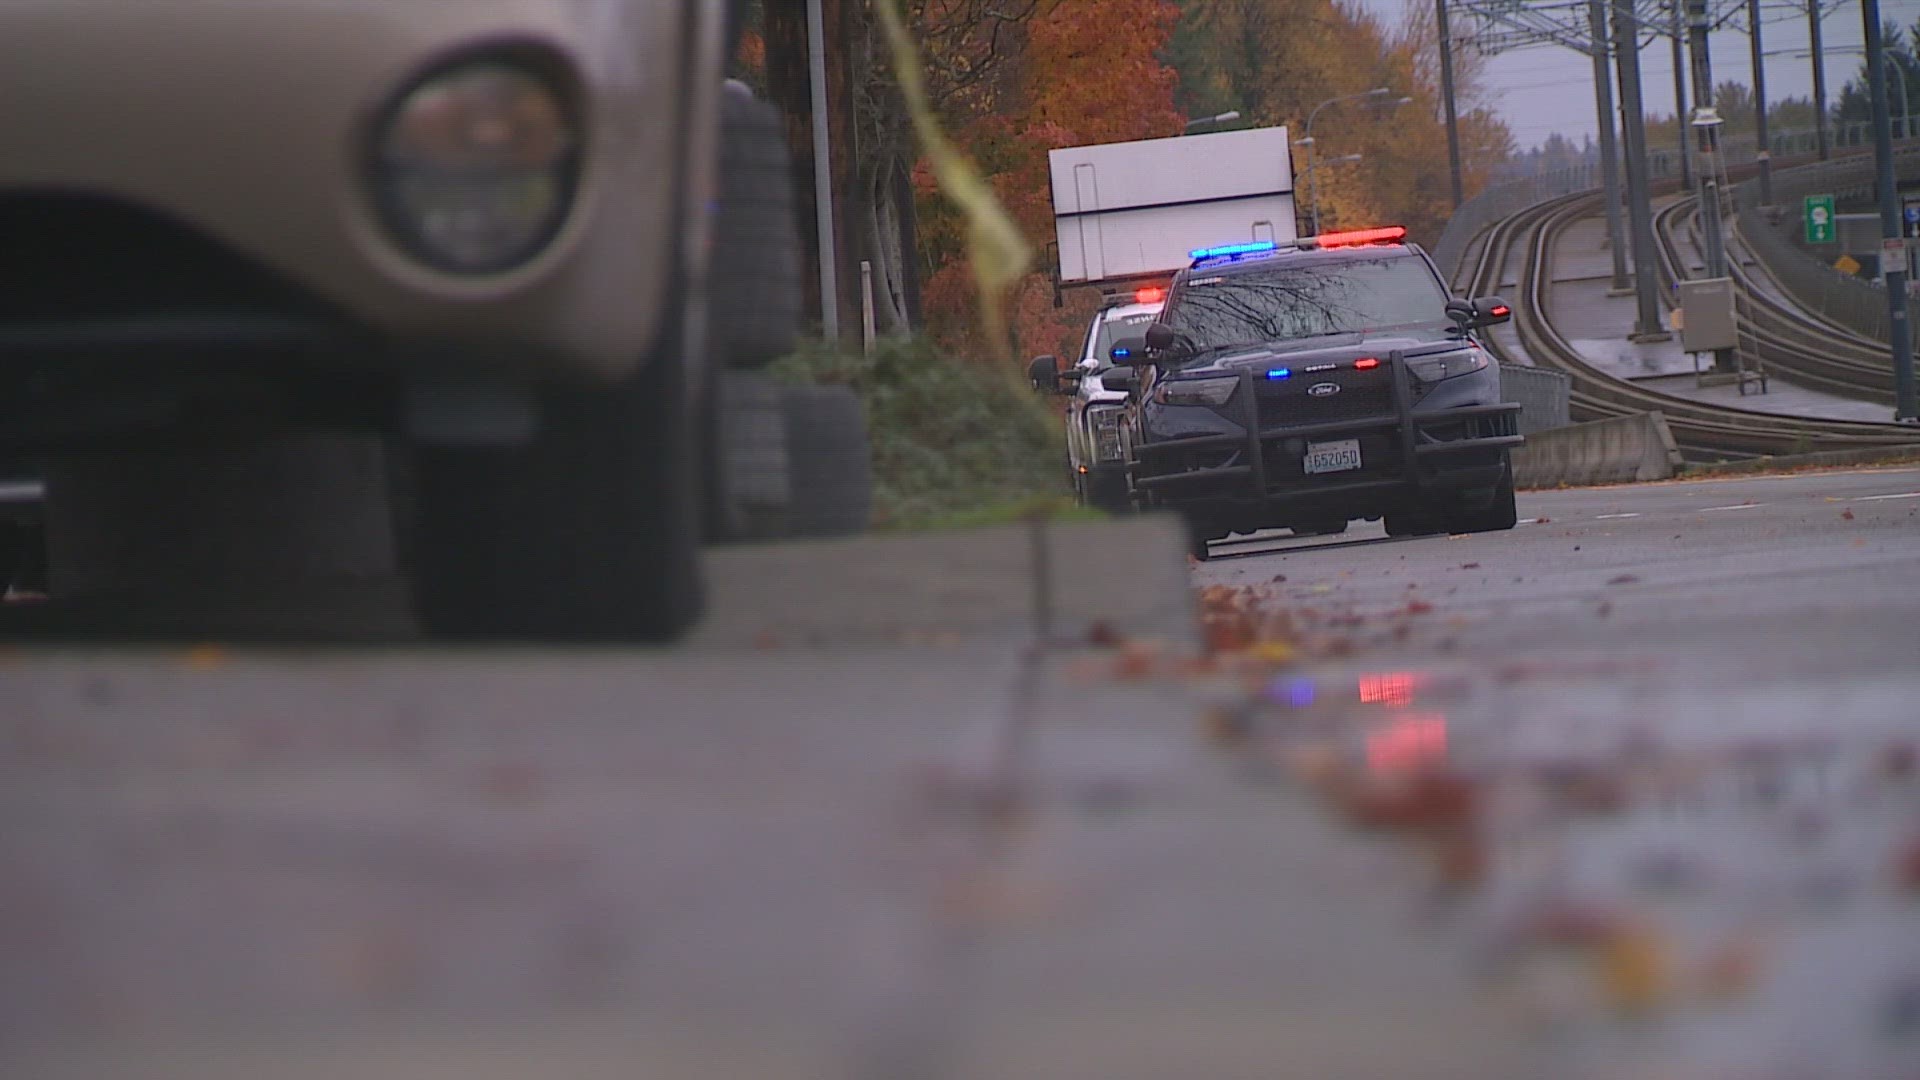 Seattle police identified the suspect in the shooting and arrested him without incident a few hours later on Nov. 11.